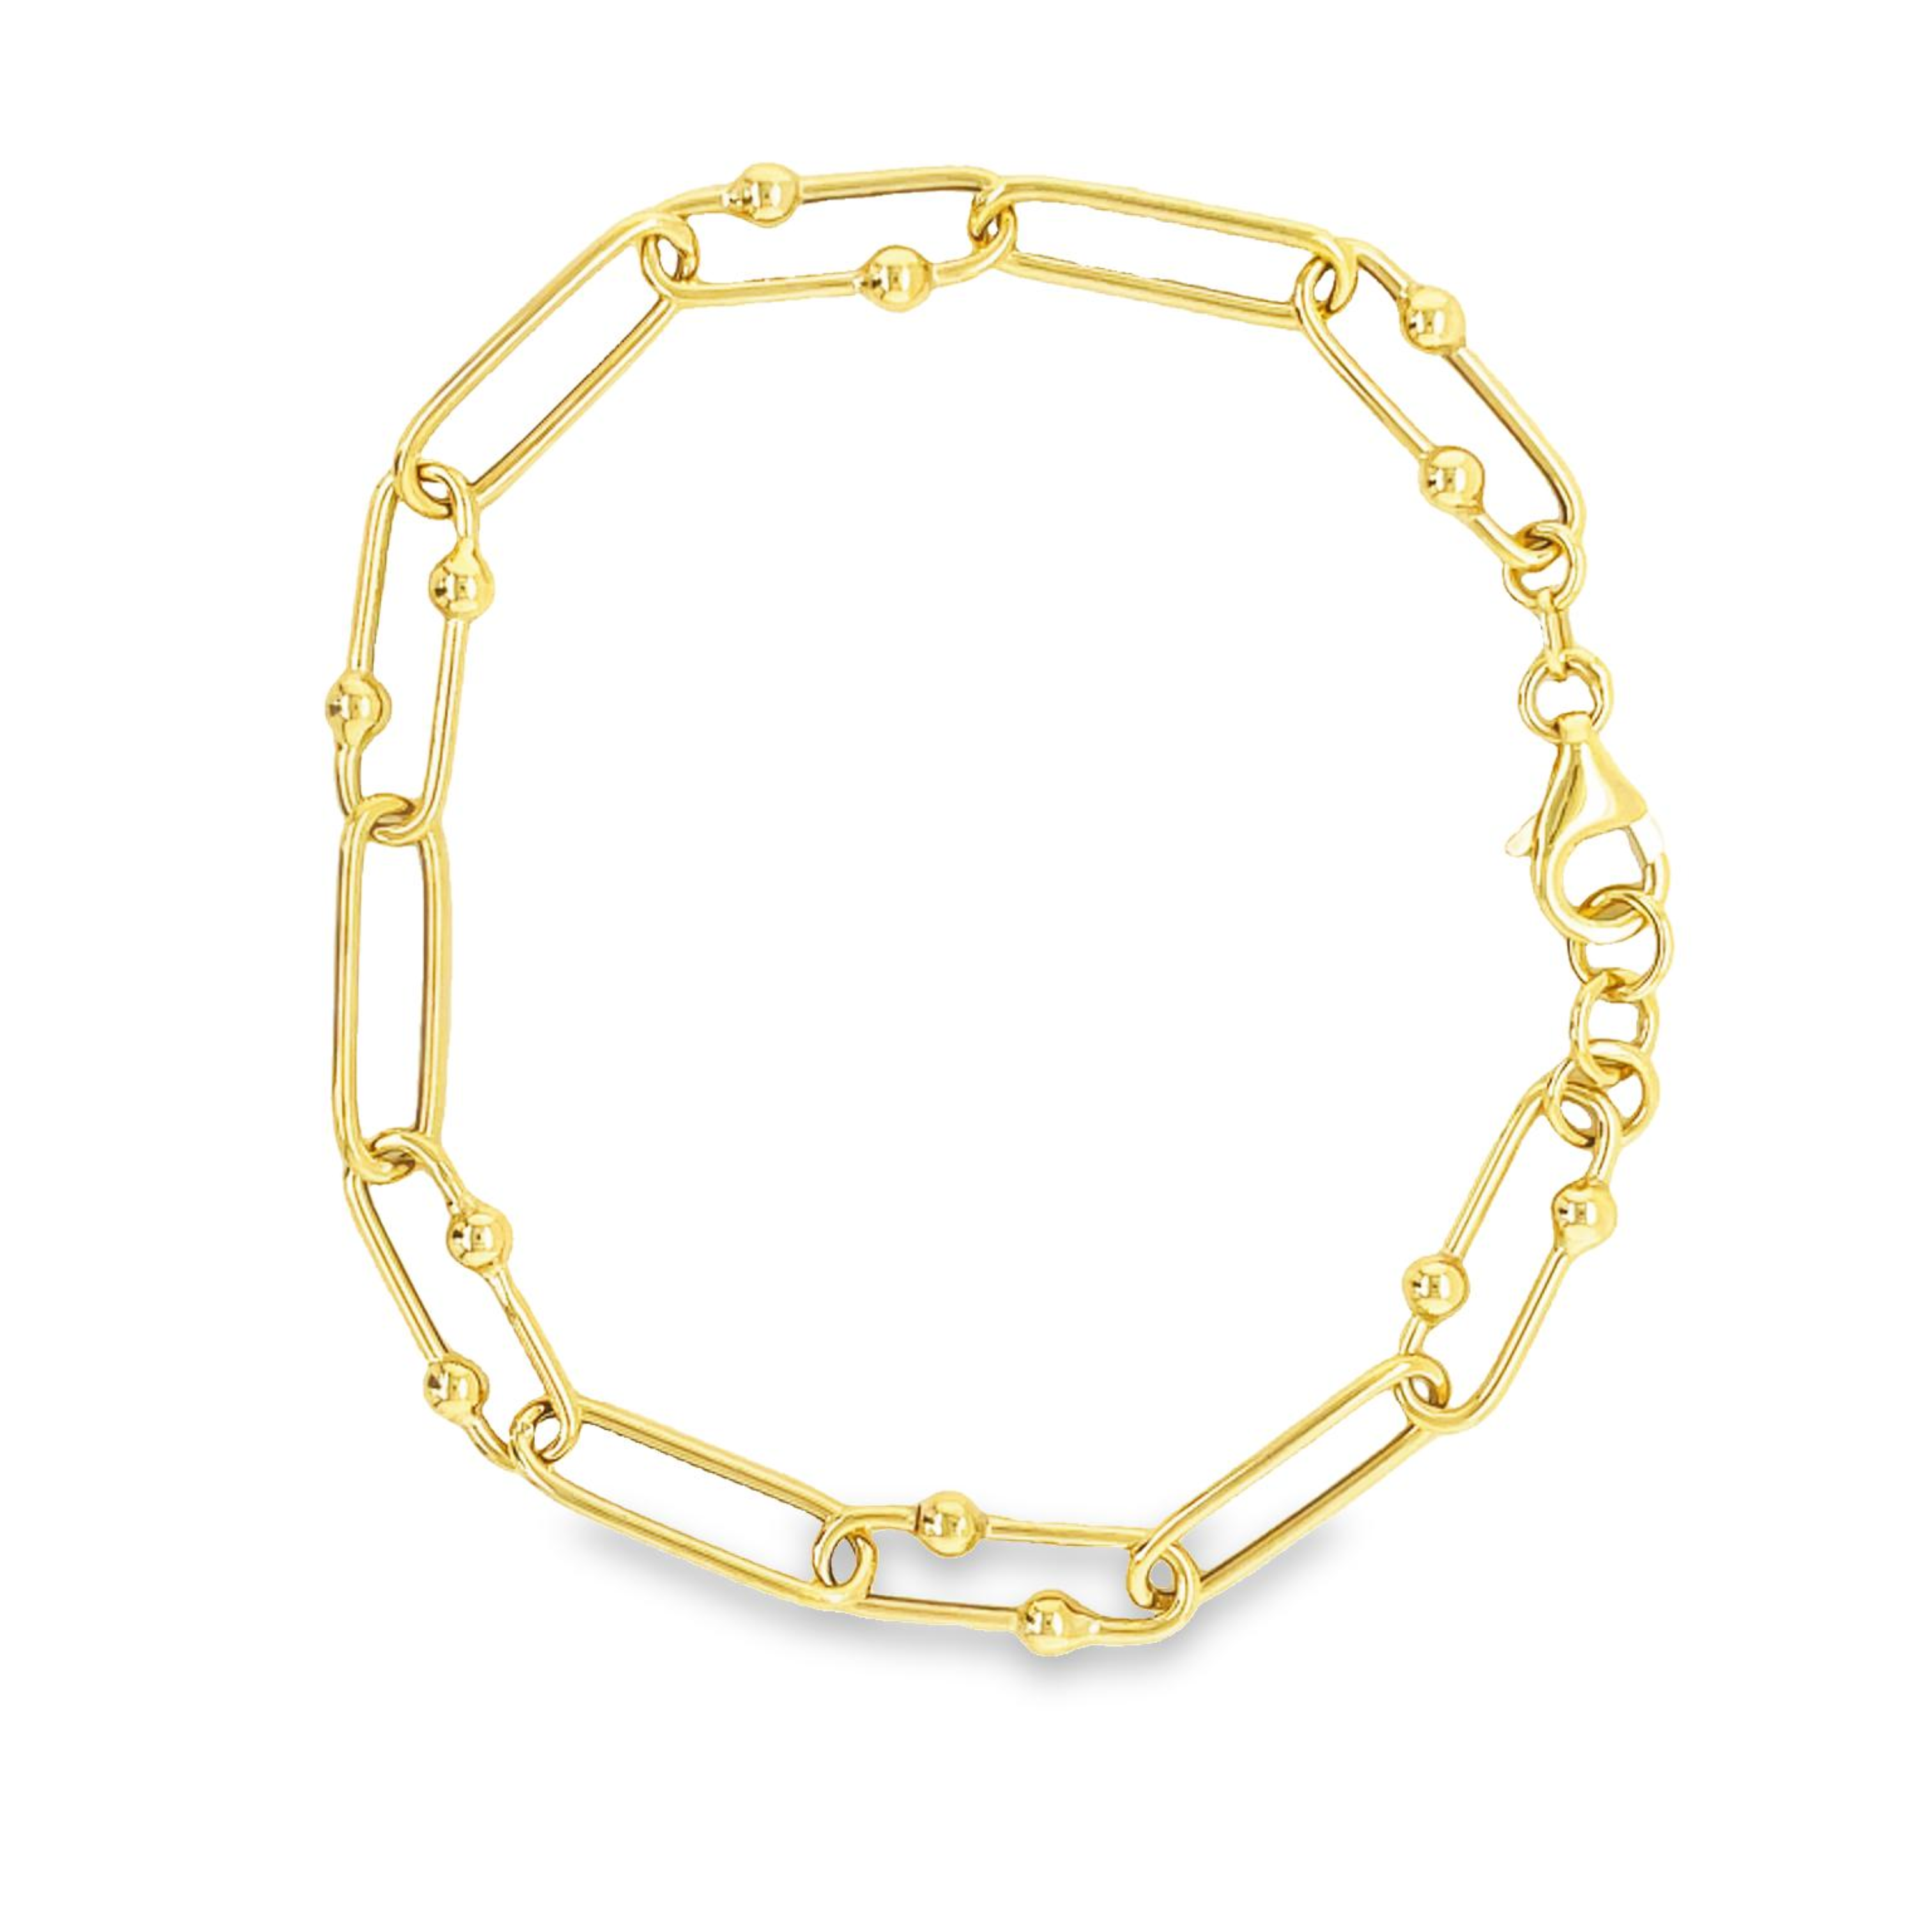 Boasting a luxurious 14K yellow gold composition, this Italian-made link bracelet is 7 inches in length and 6.00mm thick for a reliable, secure fit with a lobster-style catch.